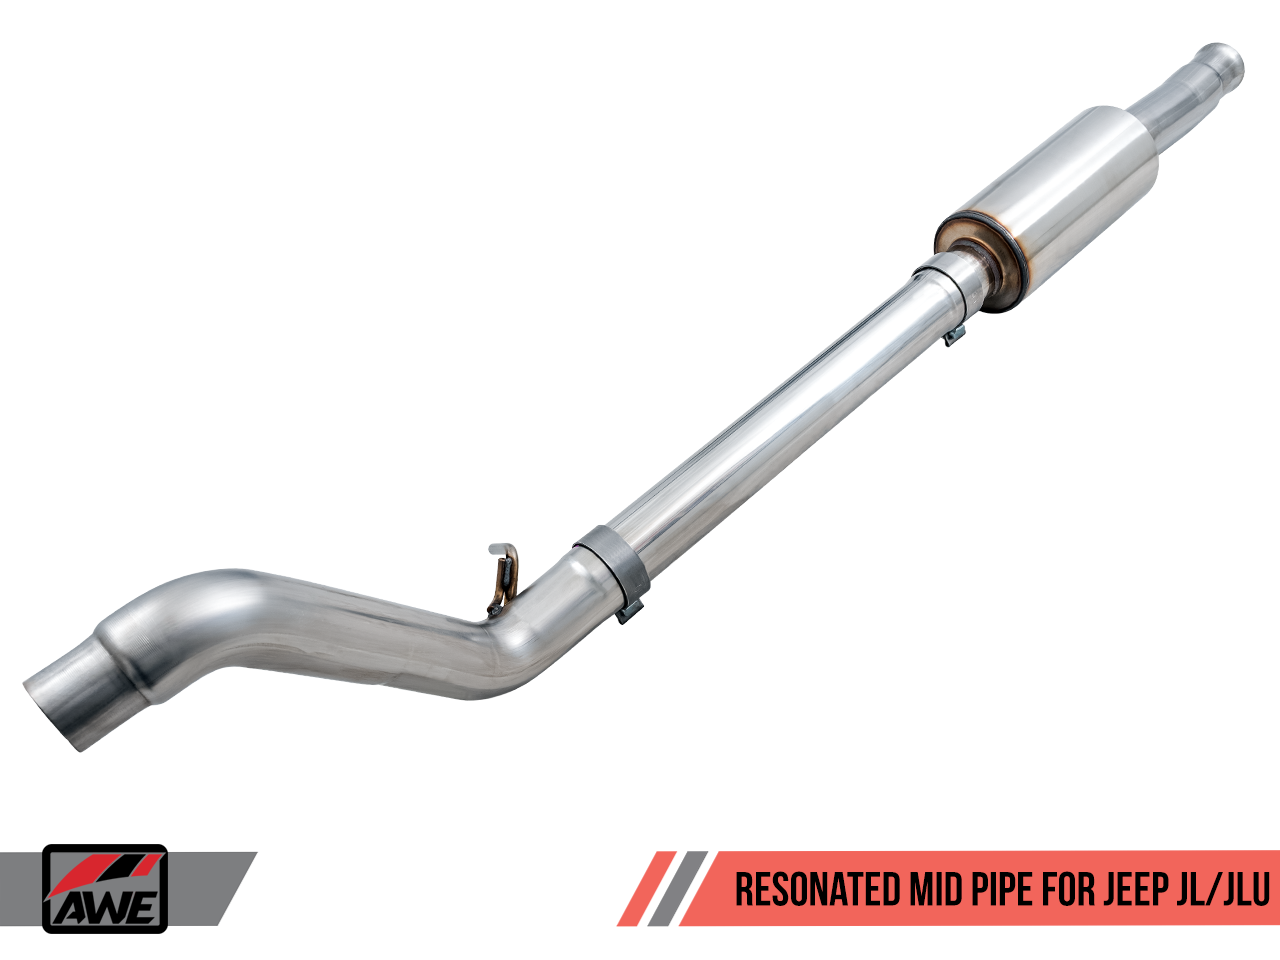 AWE Resonated Mid Pipe for Jeep JL/JLU 3.6L (3015-11001)